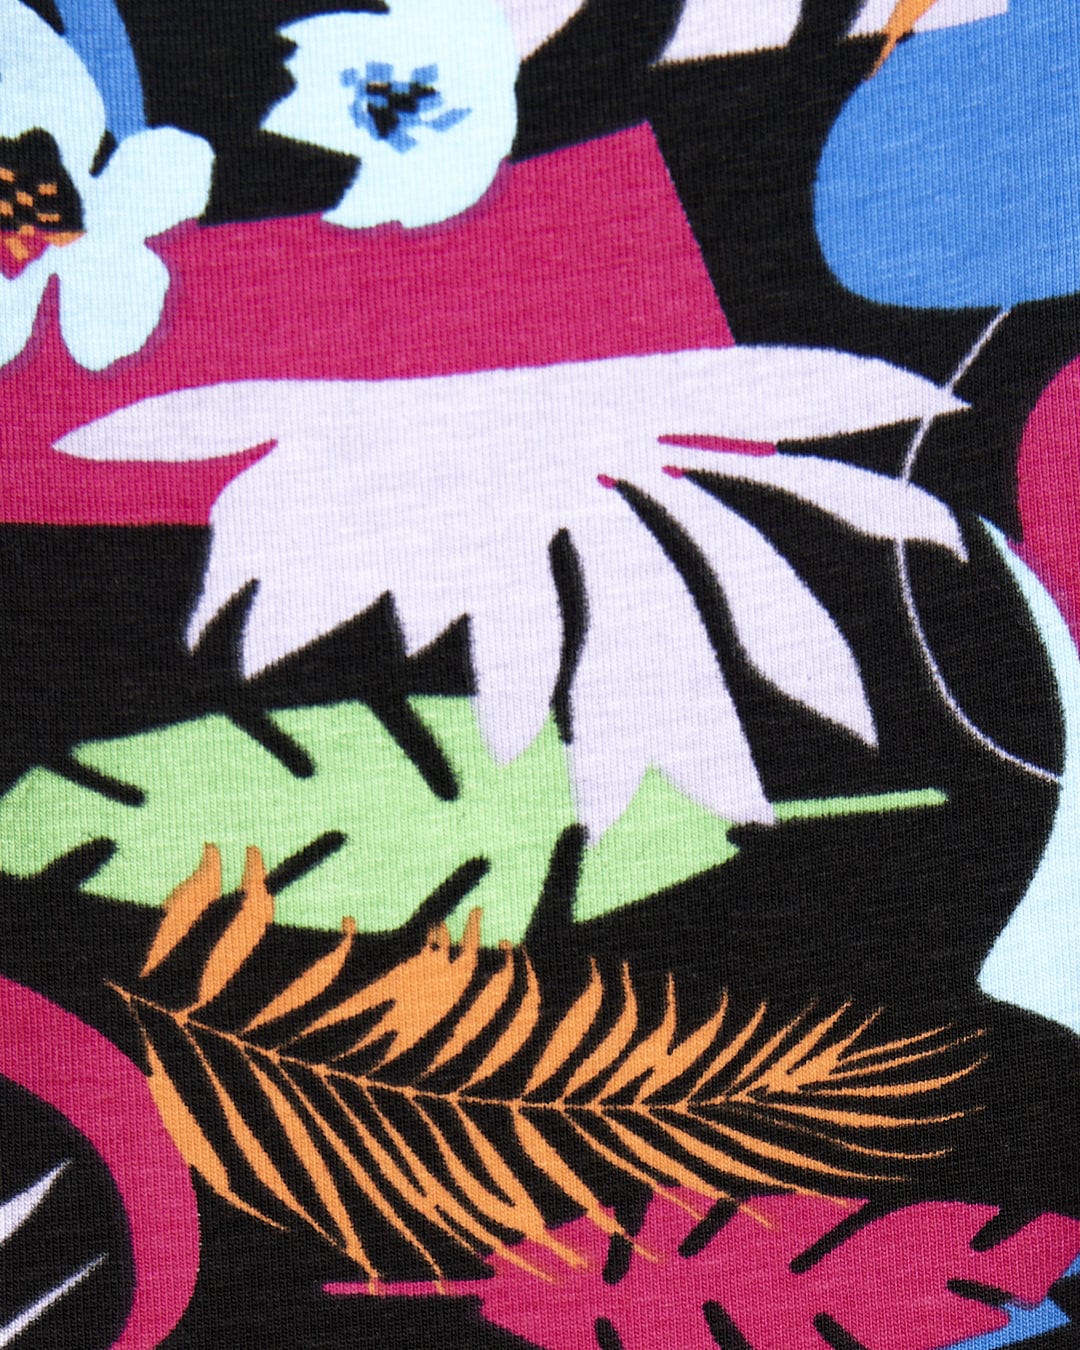 A close up image of a Saltrock Zephyr - Kids Leggings - Black with colorful leaves and flowers.